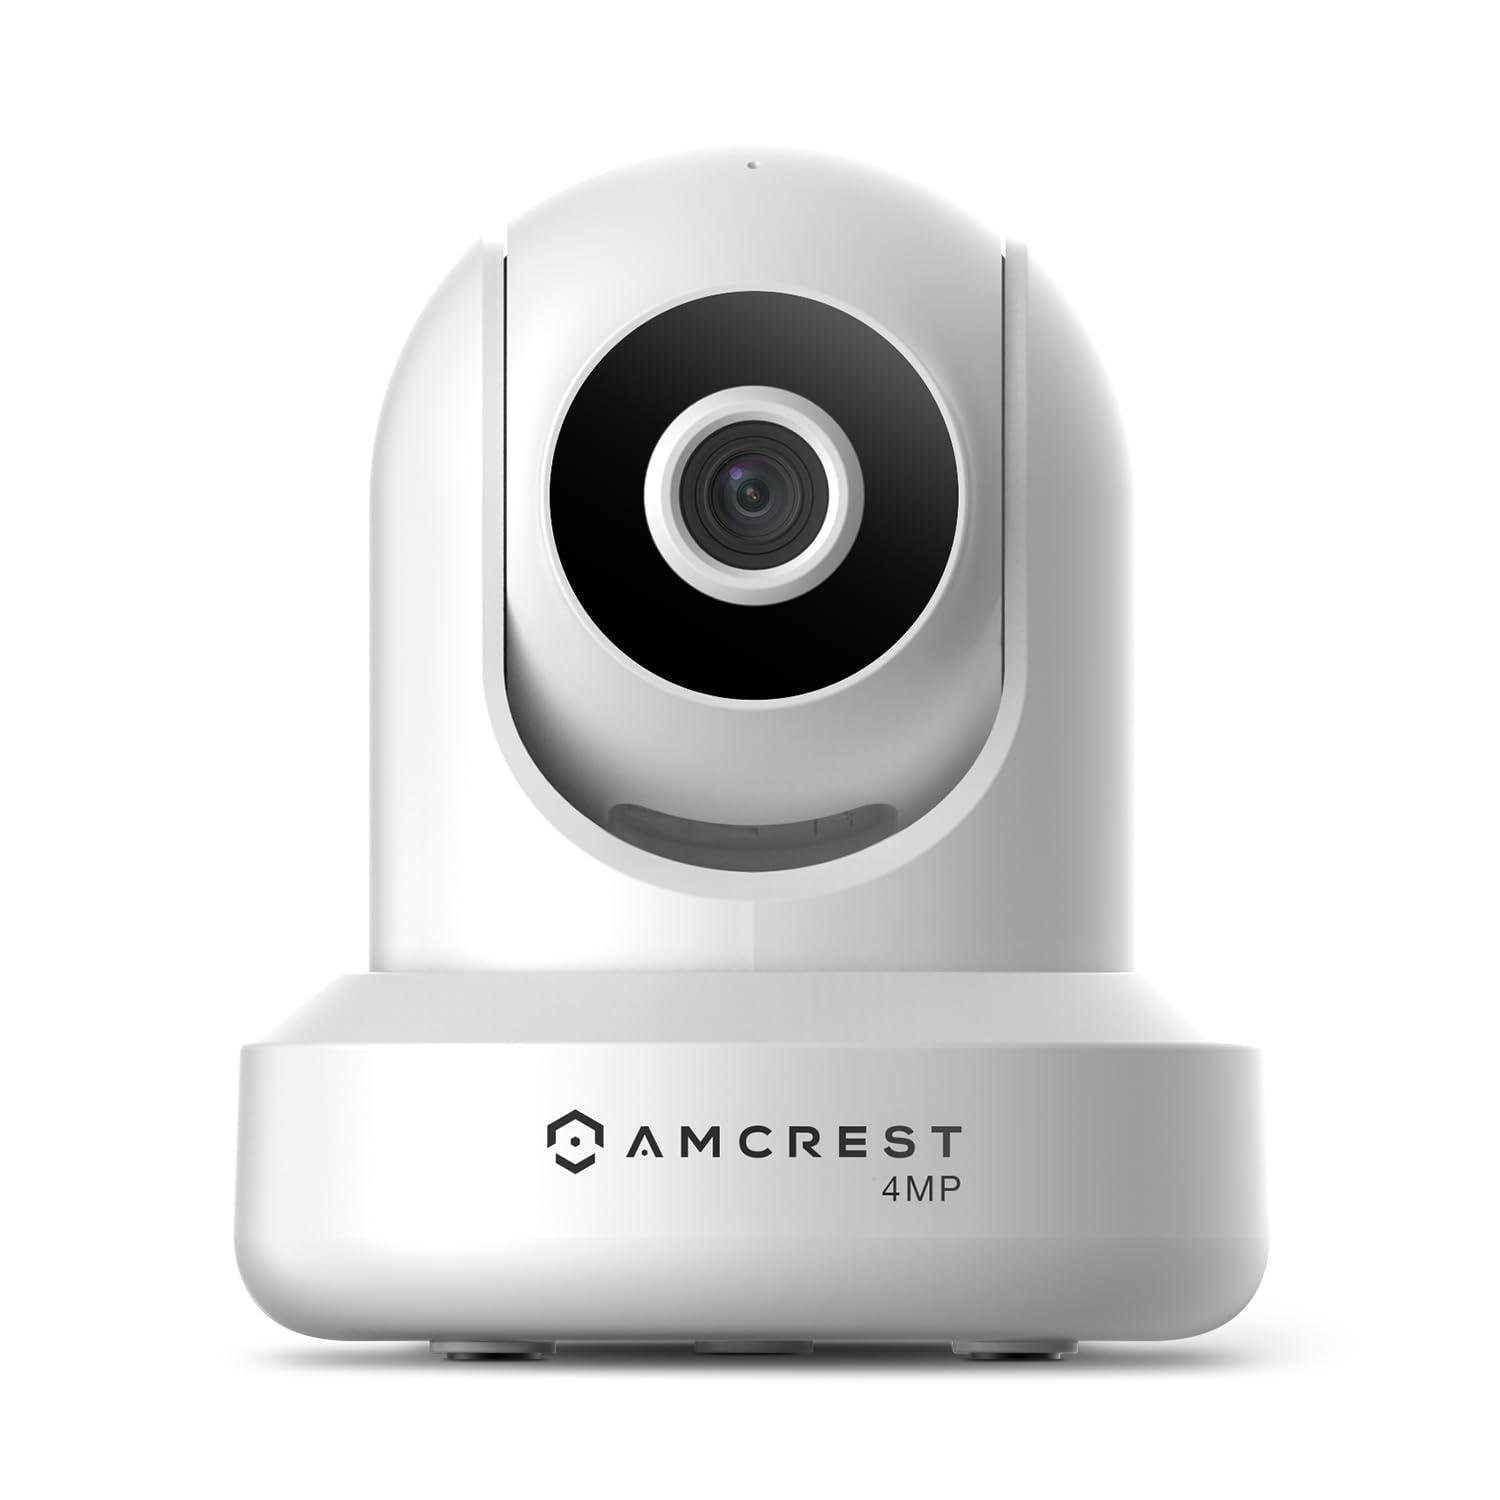 amcrest 4mp prohd indoor wifi, security ip camera with pan/tilt, two-way audio, night vision, remote viewing, 4-megapixel @30